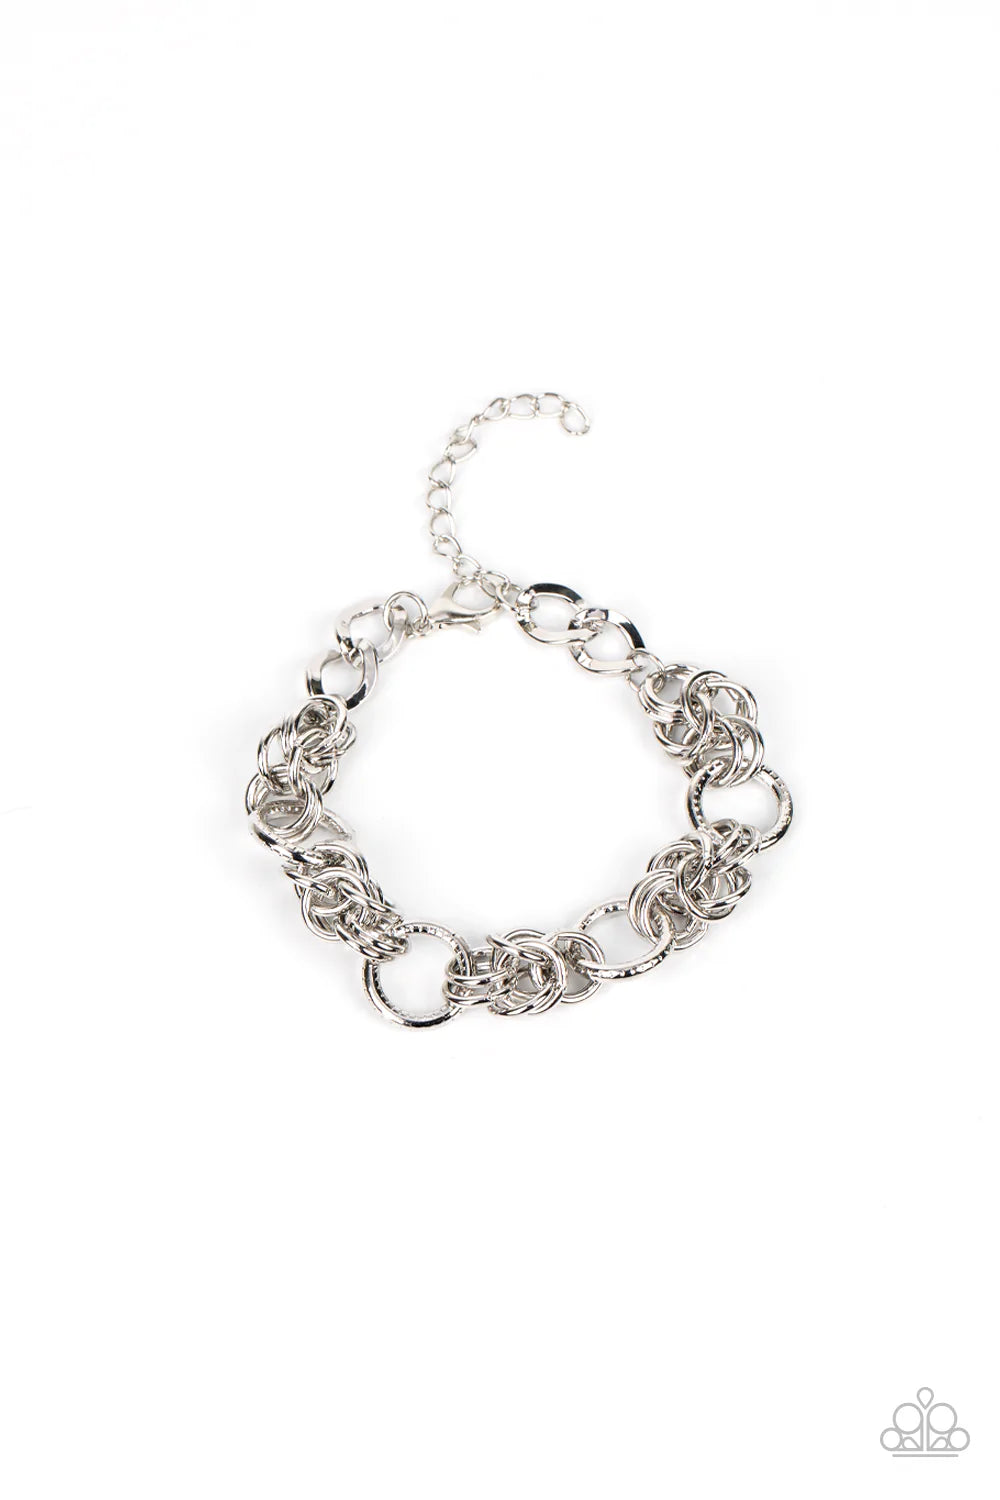 Paparazzi Accessories Big City Chic Gold: Spunky sections of mismatched gold links boldly interlock around the wrist, creating a gritty chain. Features an adjustable clasp closure. Sold as one individual bracelet. Silver: Spunky sections of mismatched sil